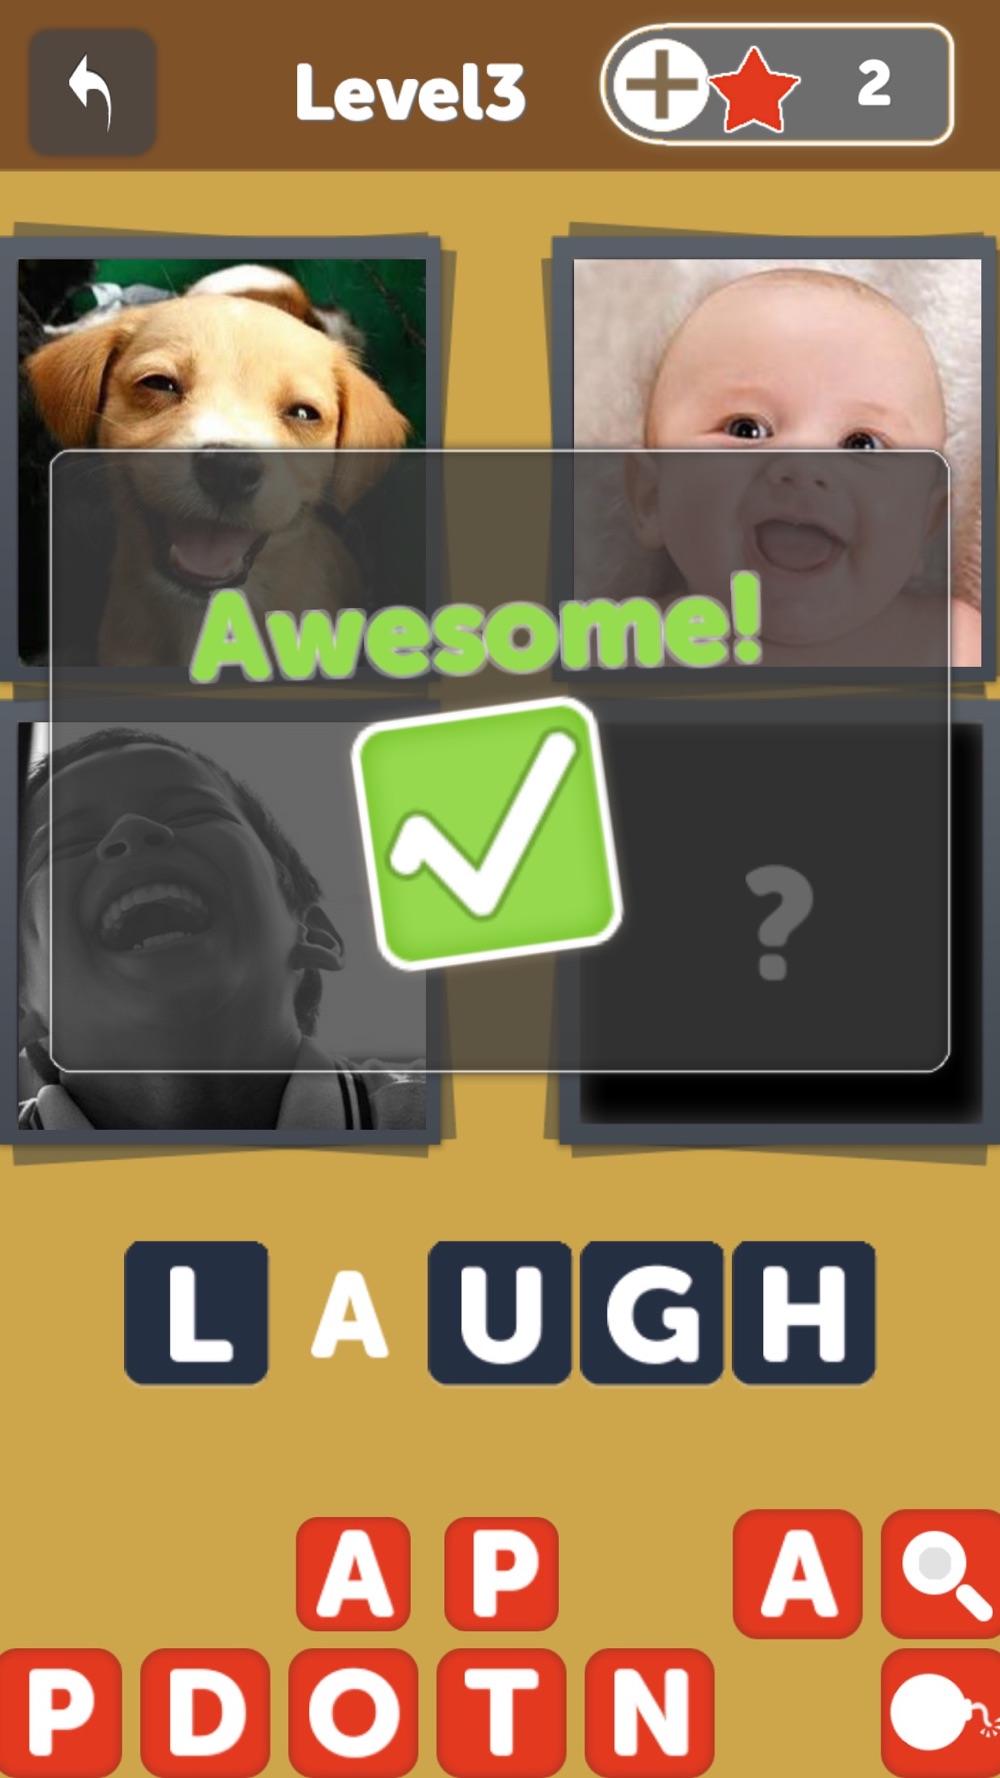 OMG Guess What - Pics to puzzle Quiz, find 1 word from 4 picture in this free family pic game Free Download for iPhone -